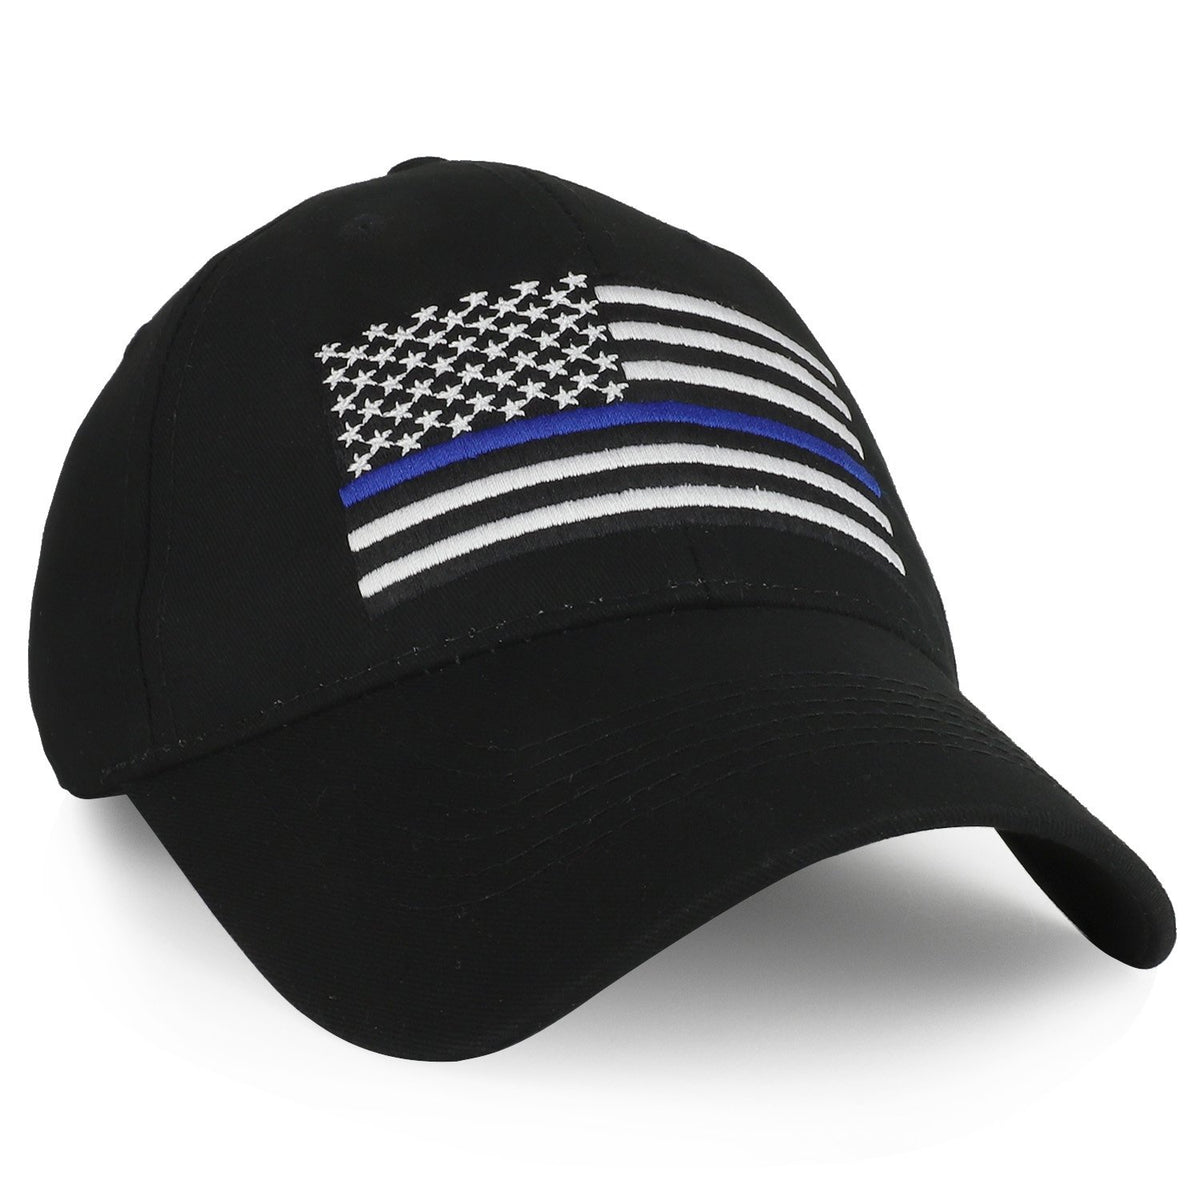 Armycrew Law Enforcement US Thin Blue Line Flag Embroidered Baseball Cap